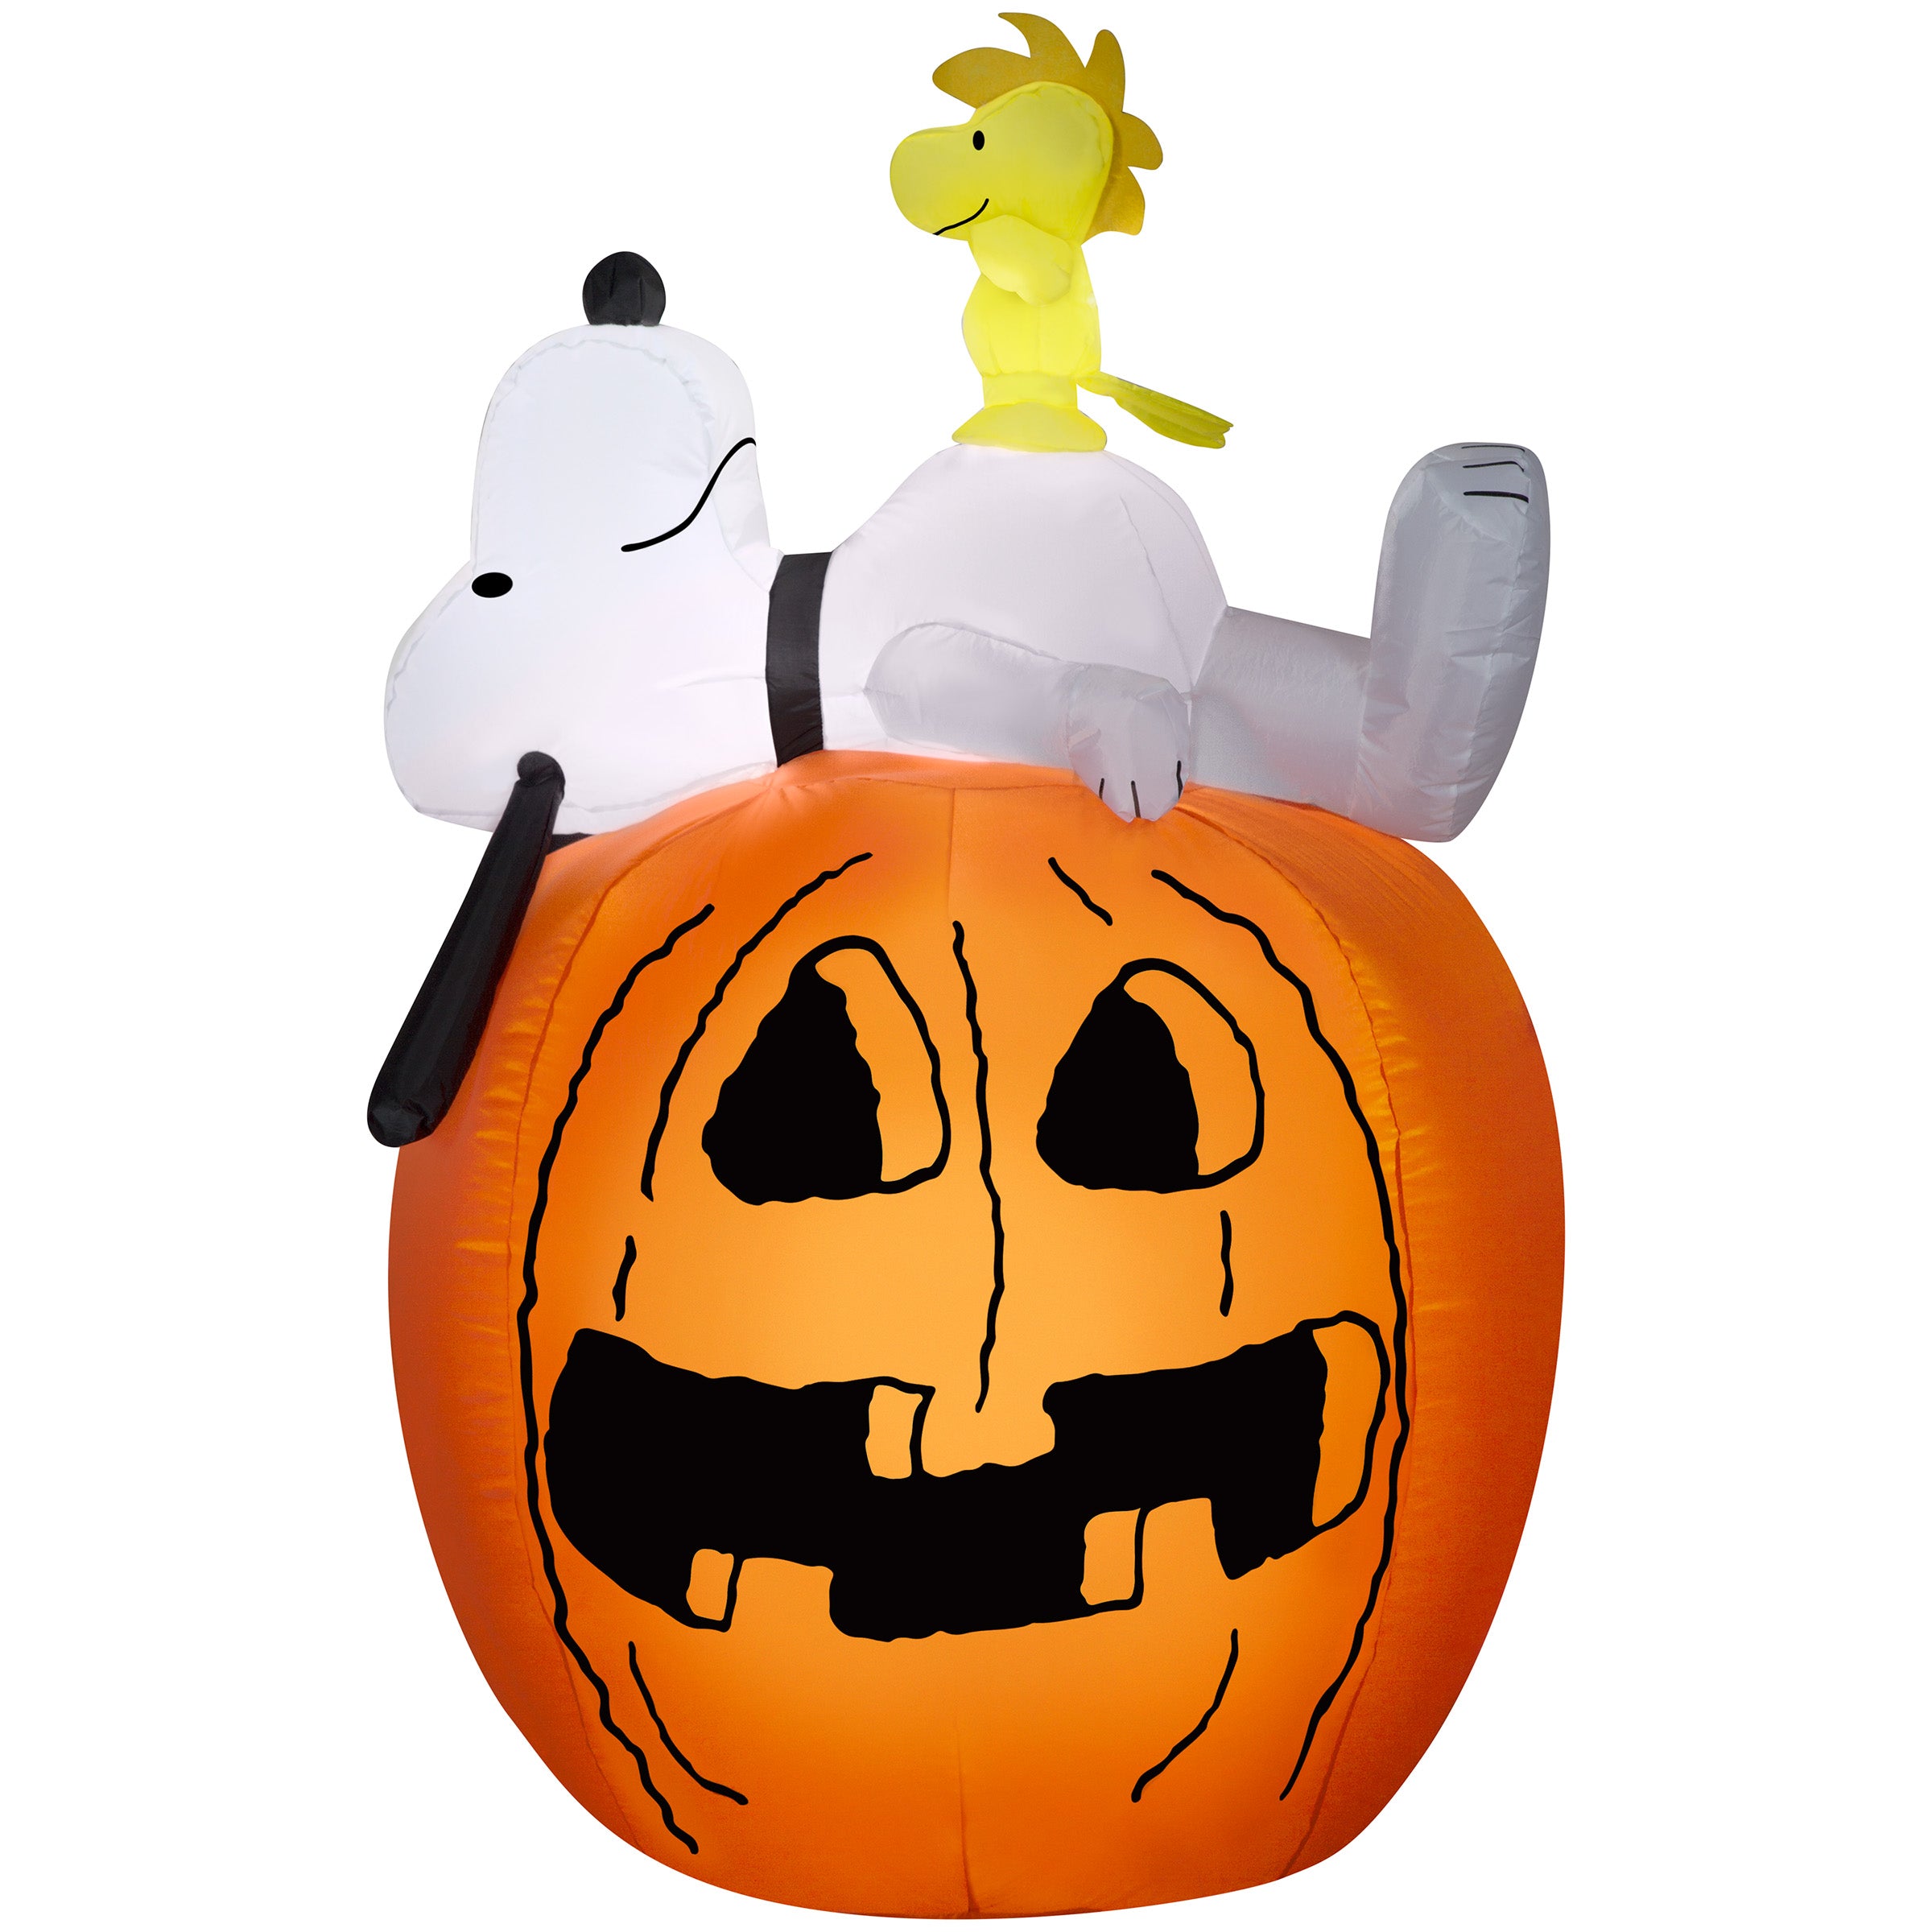 Gemmy Inflatable Halloween Yard Decoration Snoopy Woodstock Pumpkin Lighted Airblown 4.5 Foot